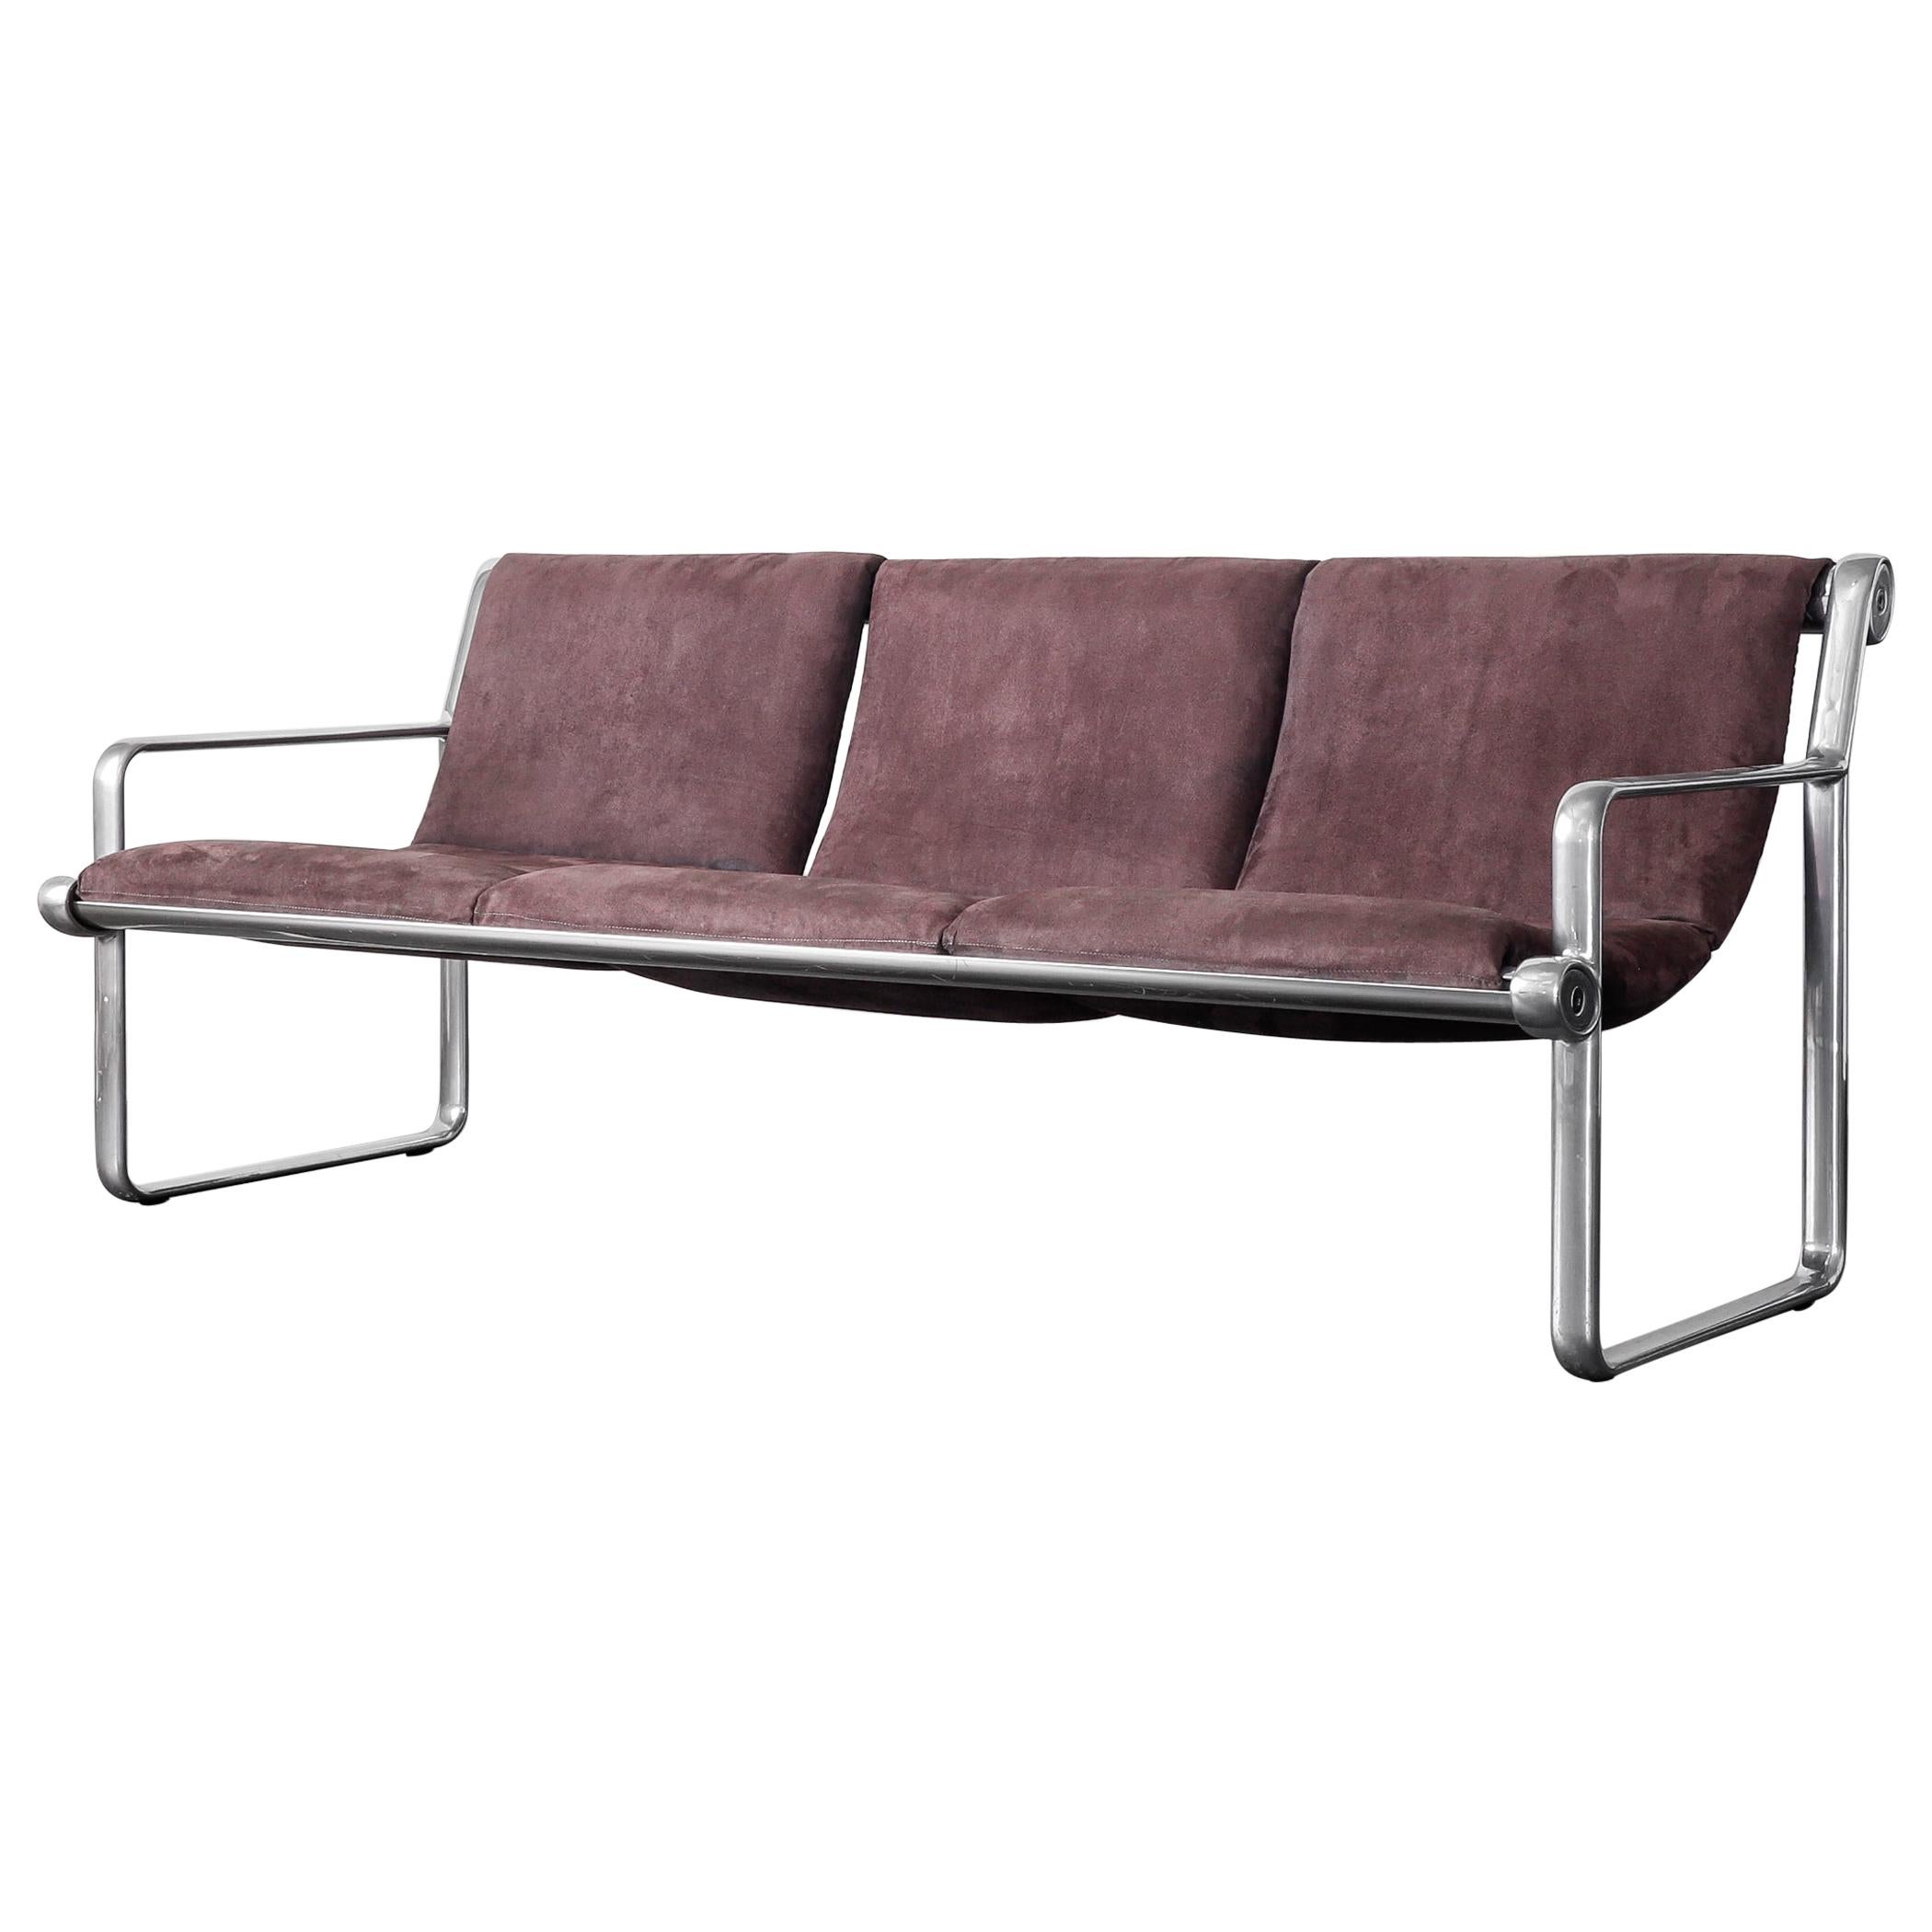 Hannah and Morrison Aluminum Sofa for Knoll, Three-Seat Sling Couch, 1970s For Sale